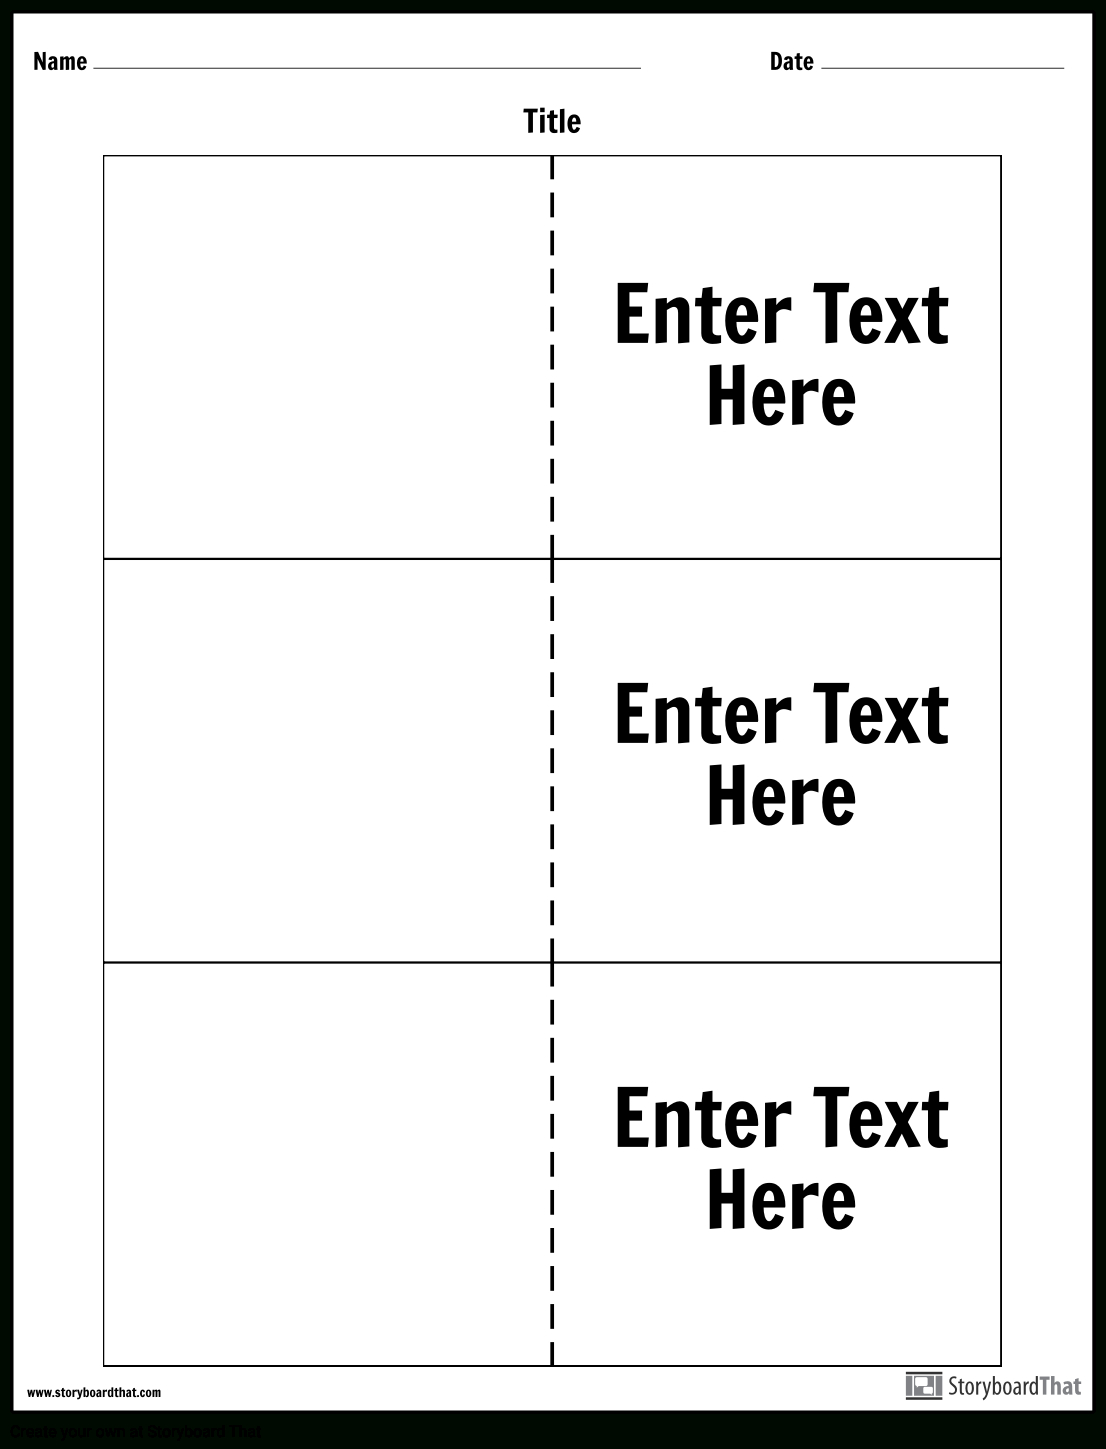 Make Printable Flashcards | Flashcard Templates Pertaining To Word Cue Card Template